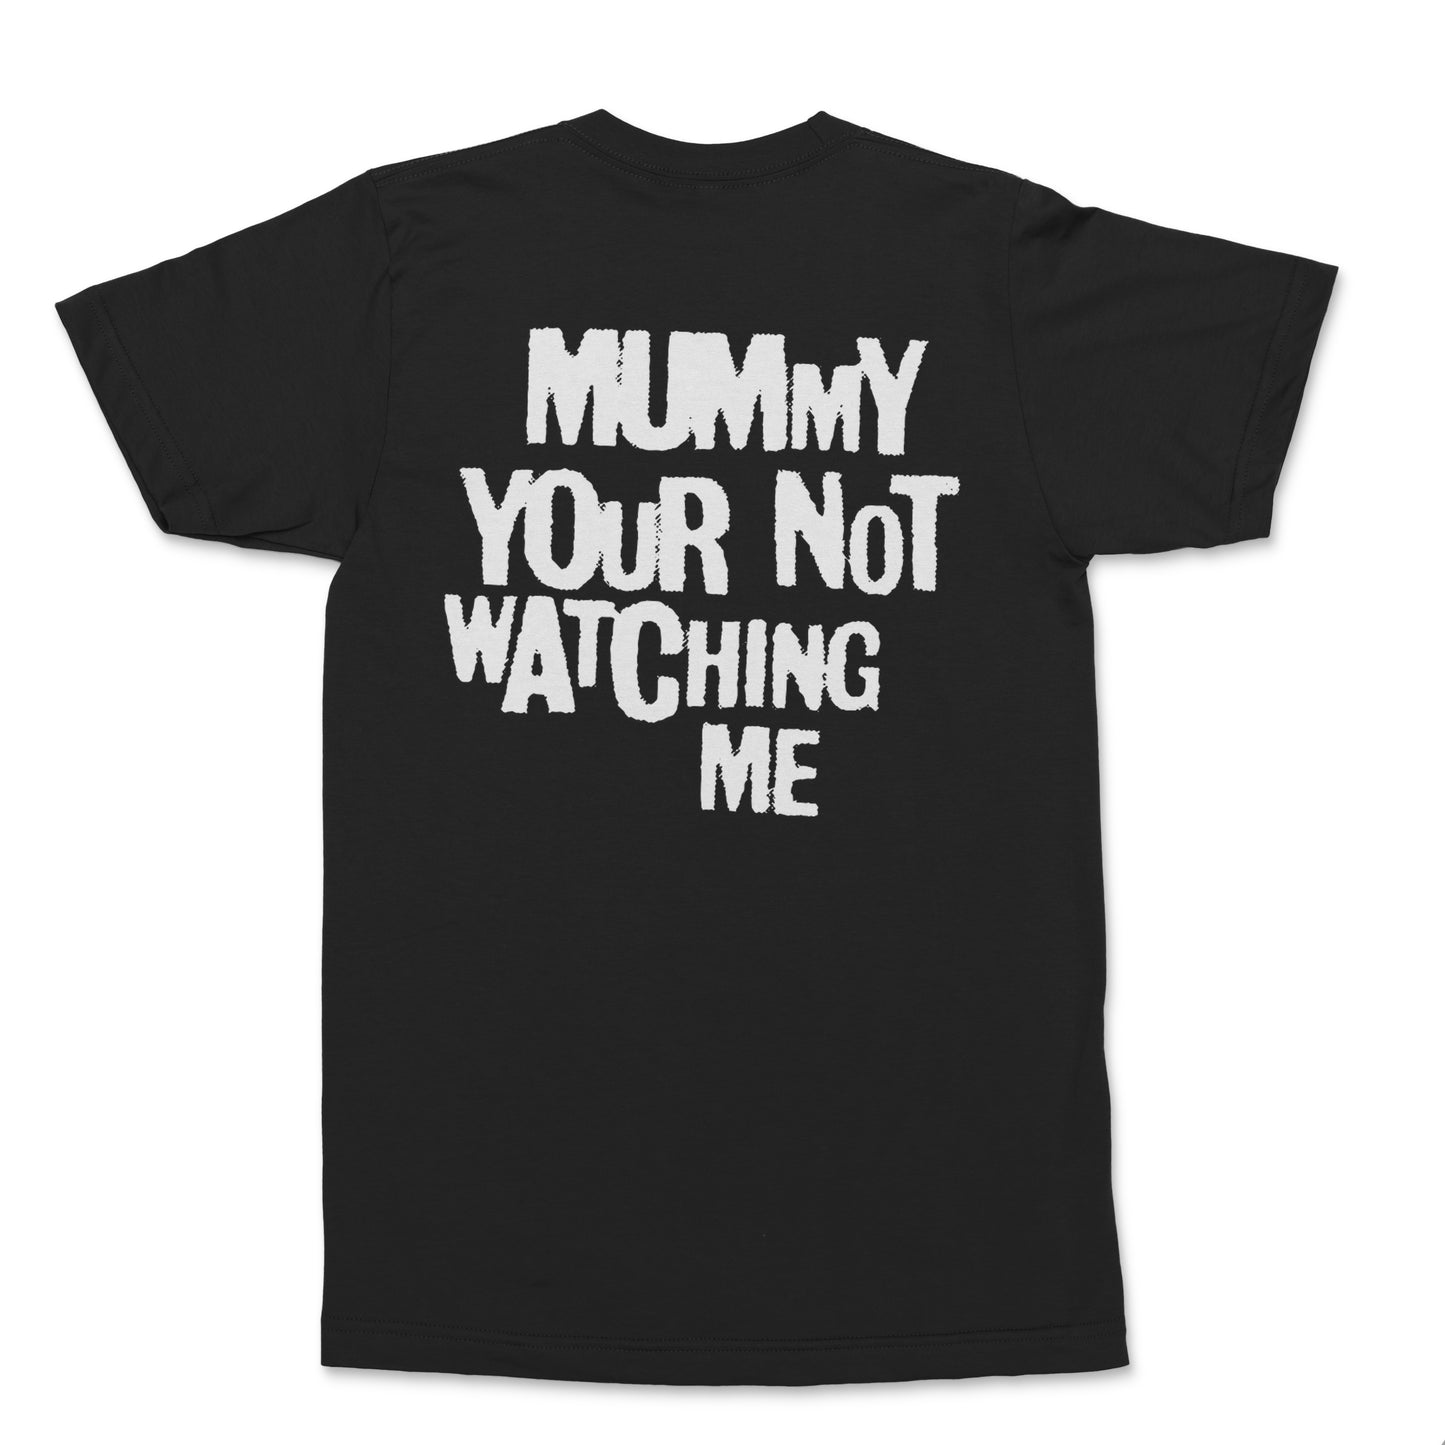 Television Personalities - Double-Sided "Mummy" T Shirt